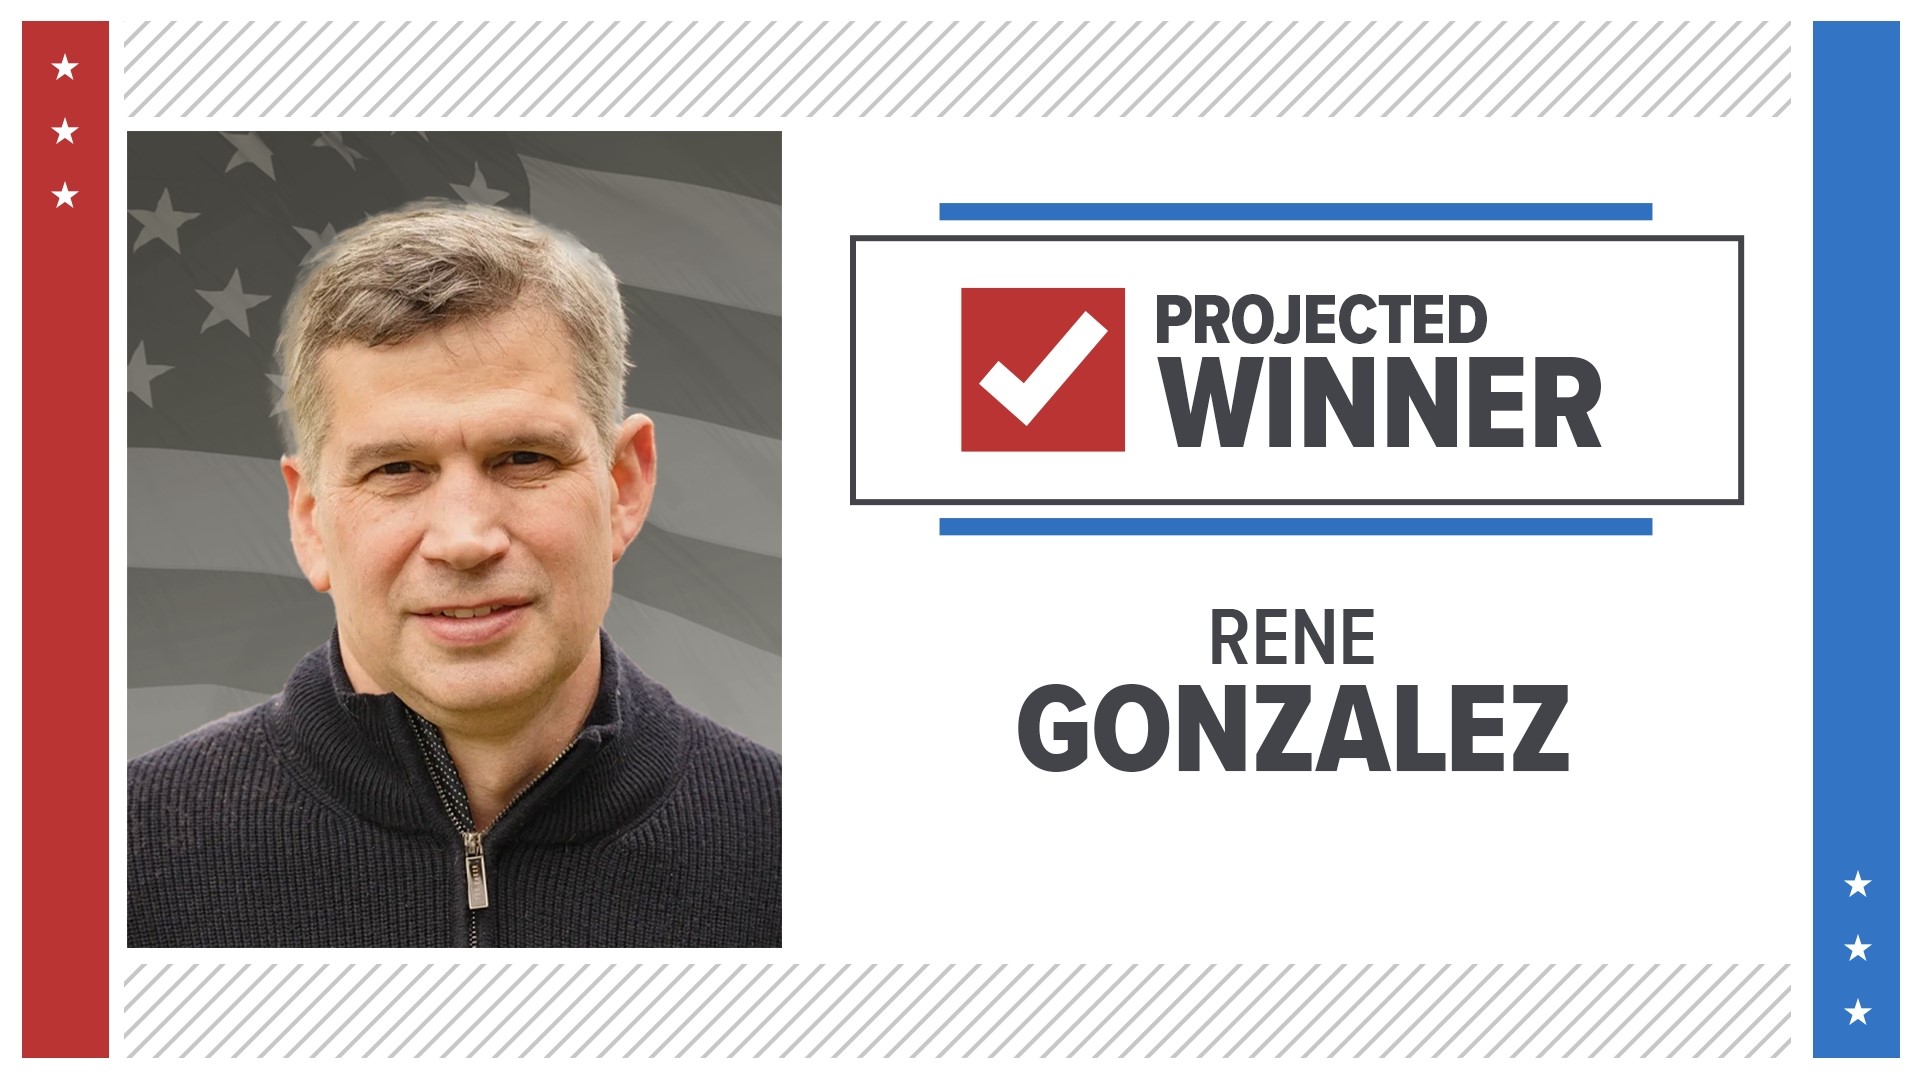 Rene Gonzalez is projected to win the race for Portland City Council, defeating incumbent Jo Ann Hardesty, according to The Oregonian.